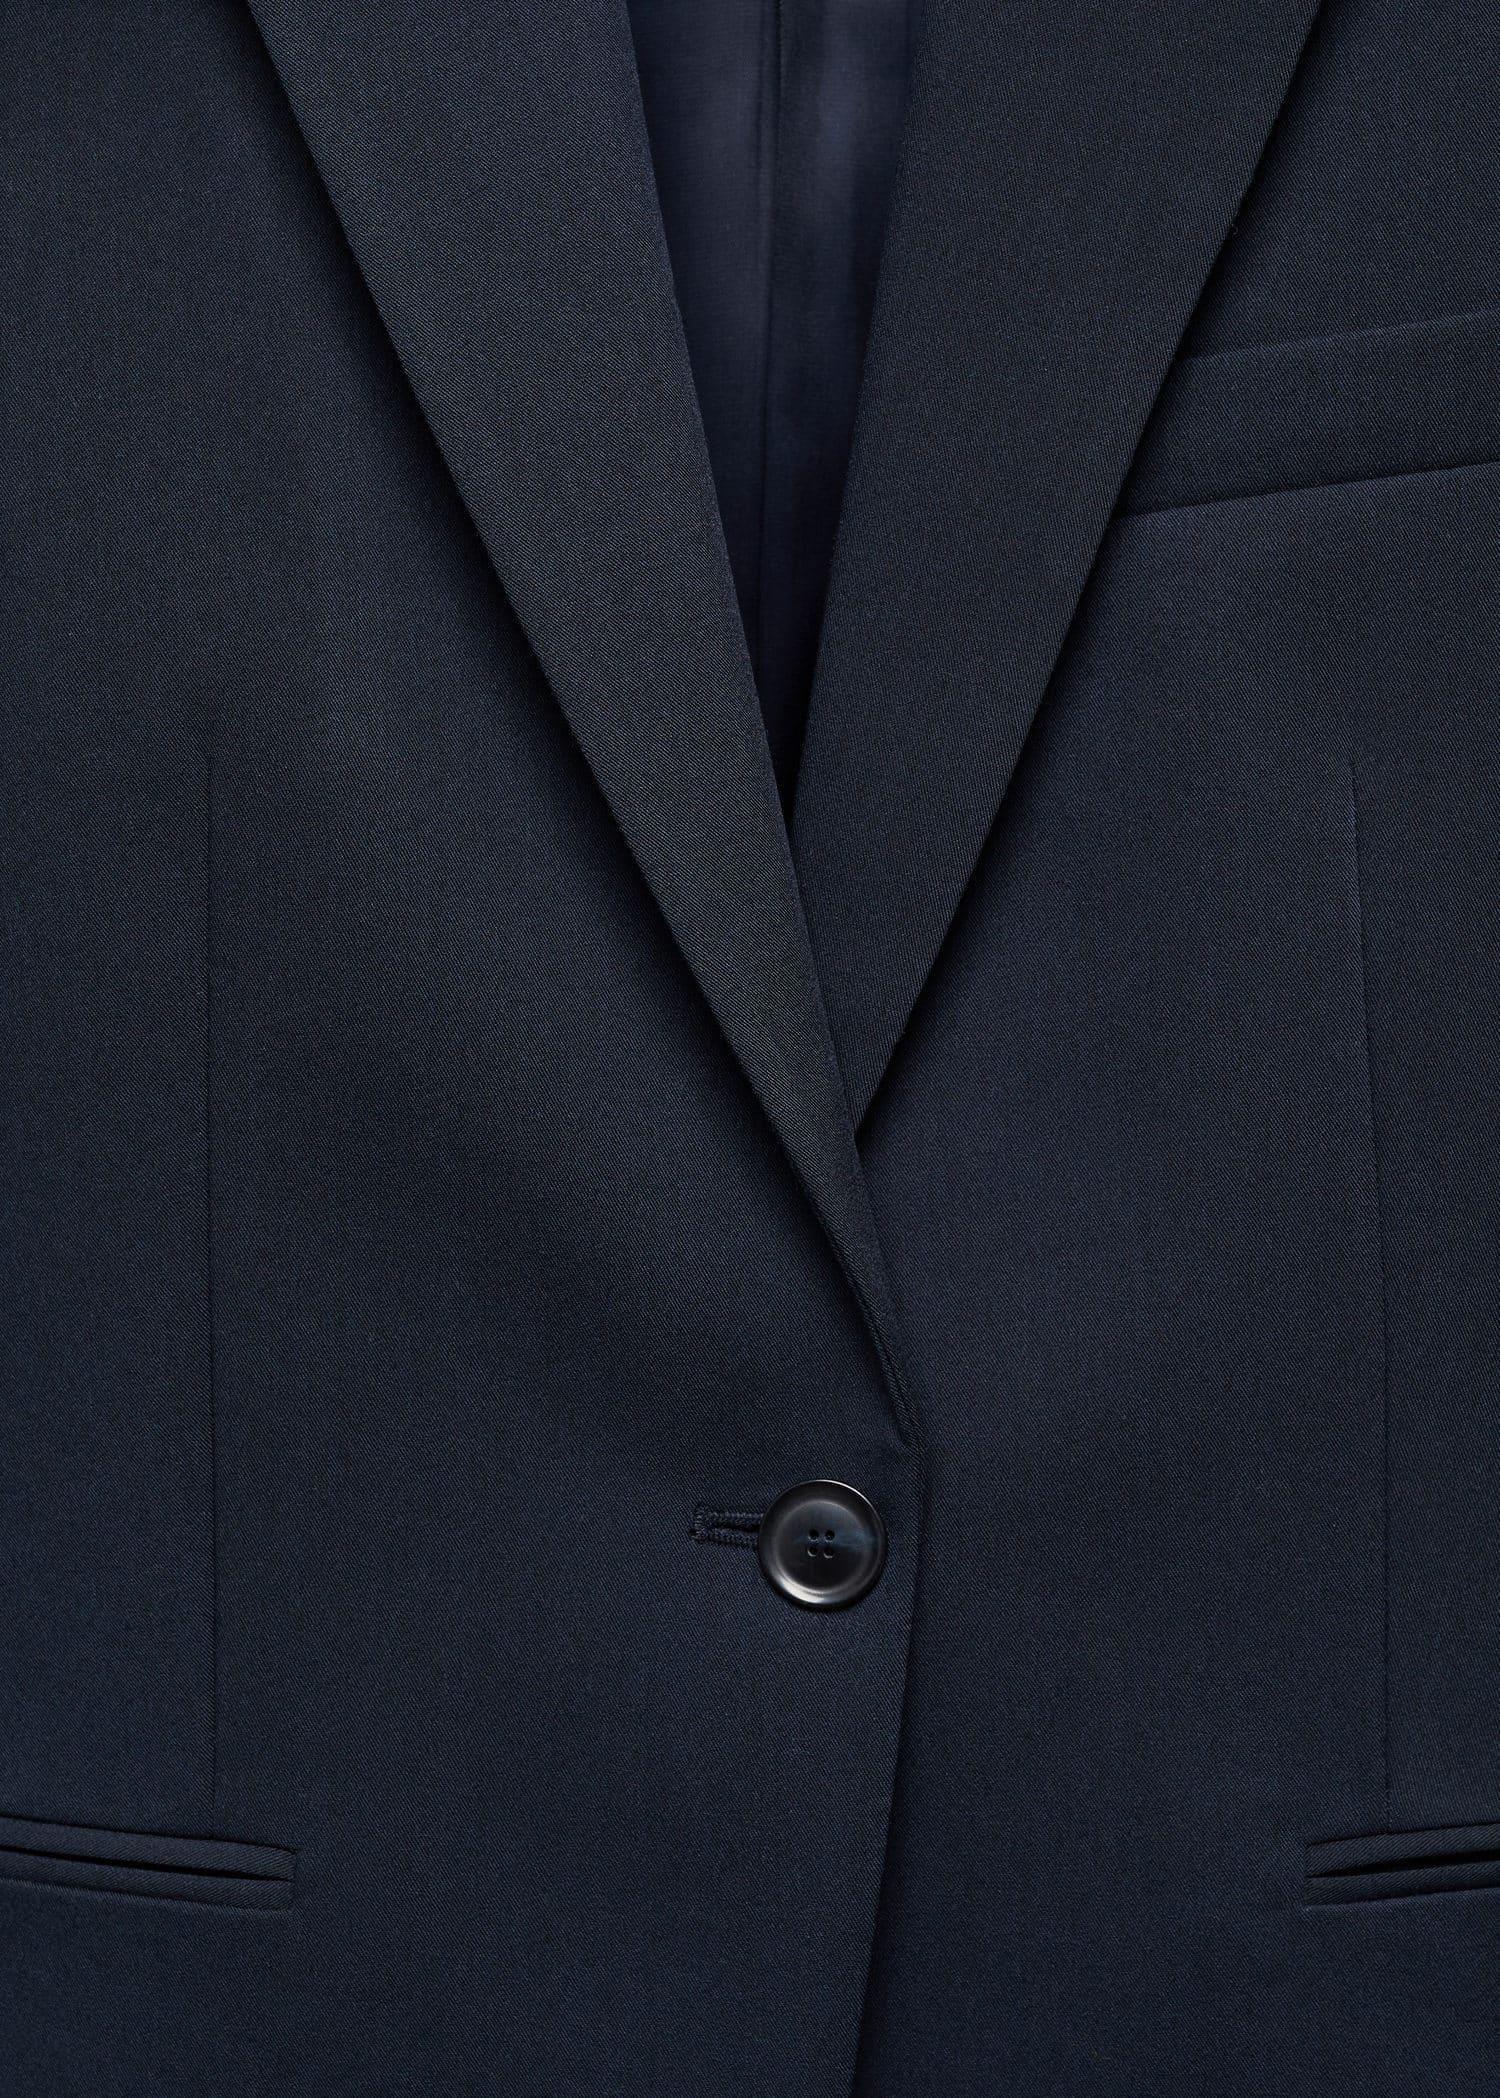 Mango - Navy Fitted Suit Jacket